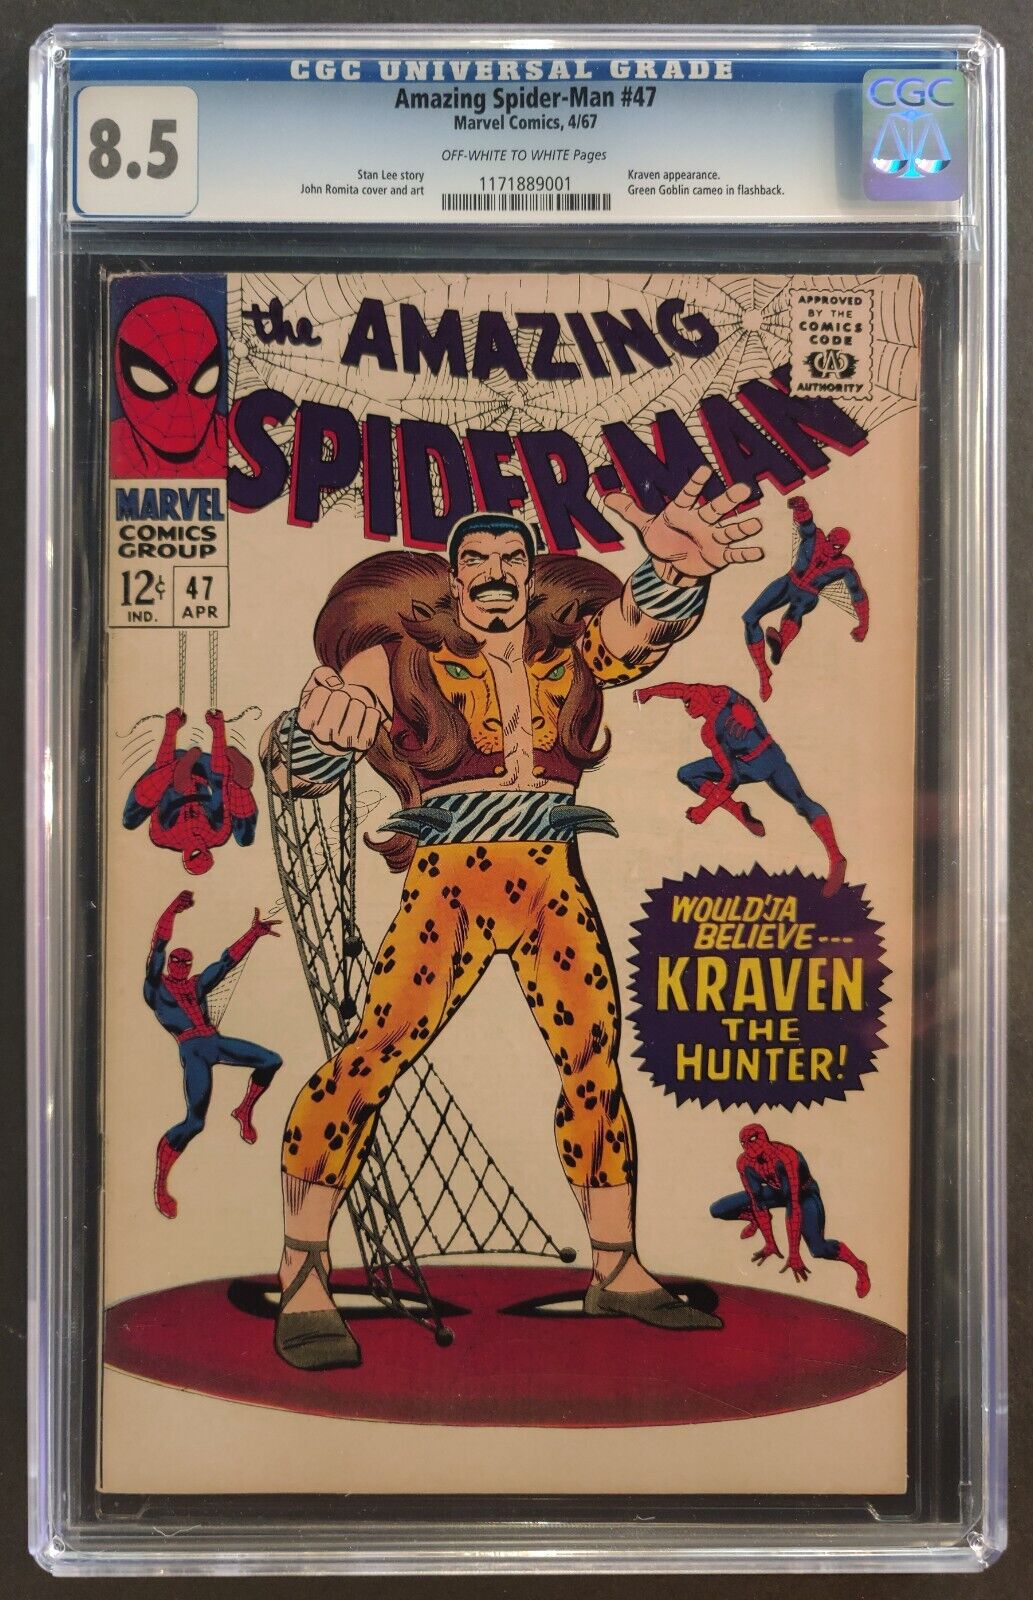 AMAZING SPIDER-MAN #47 CGC 8.5 OW-W MARVEL COMICS 1967 - EARLY KRAVEN APPEARANCE